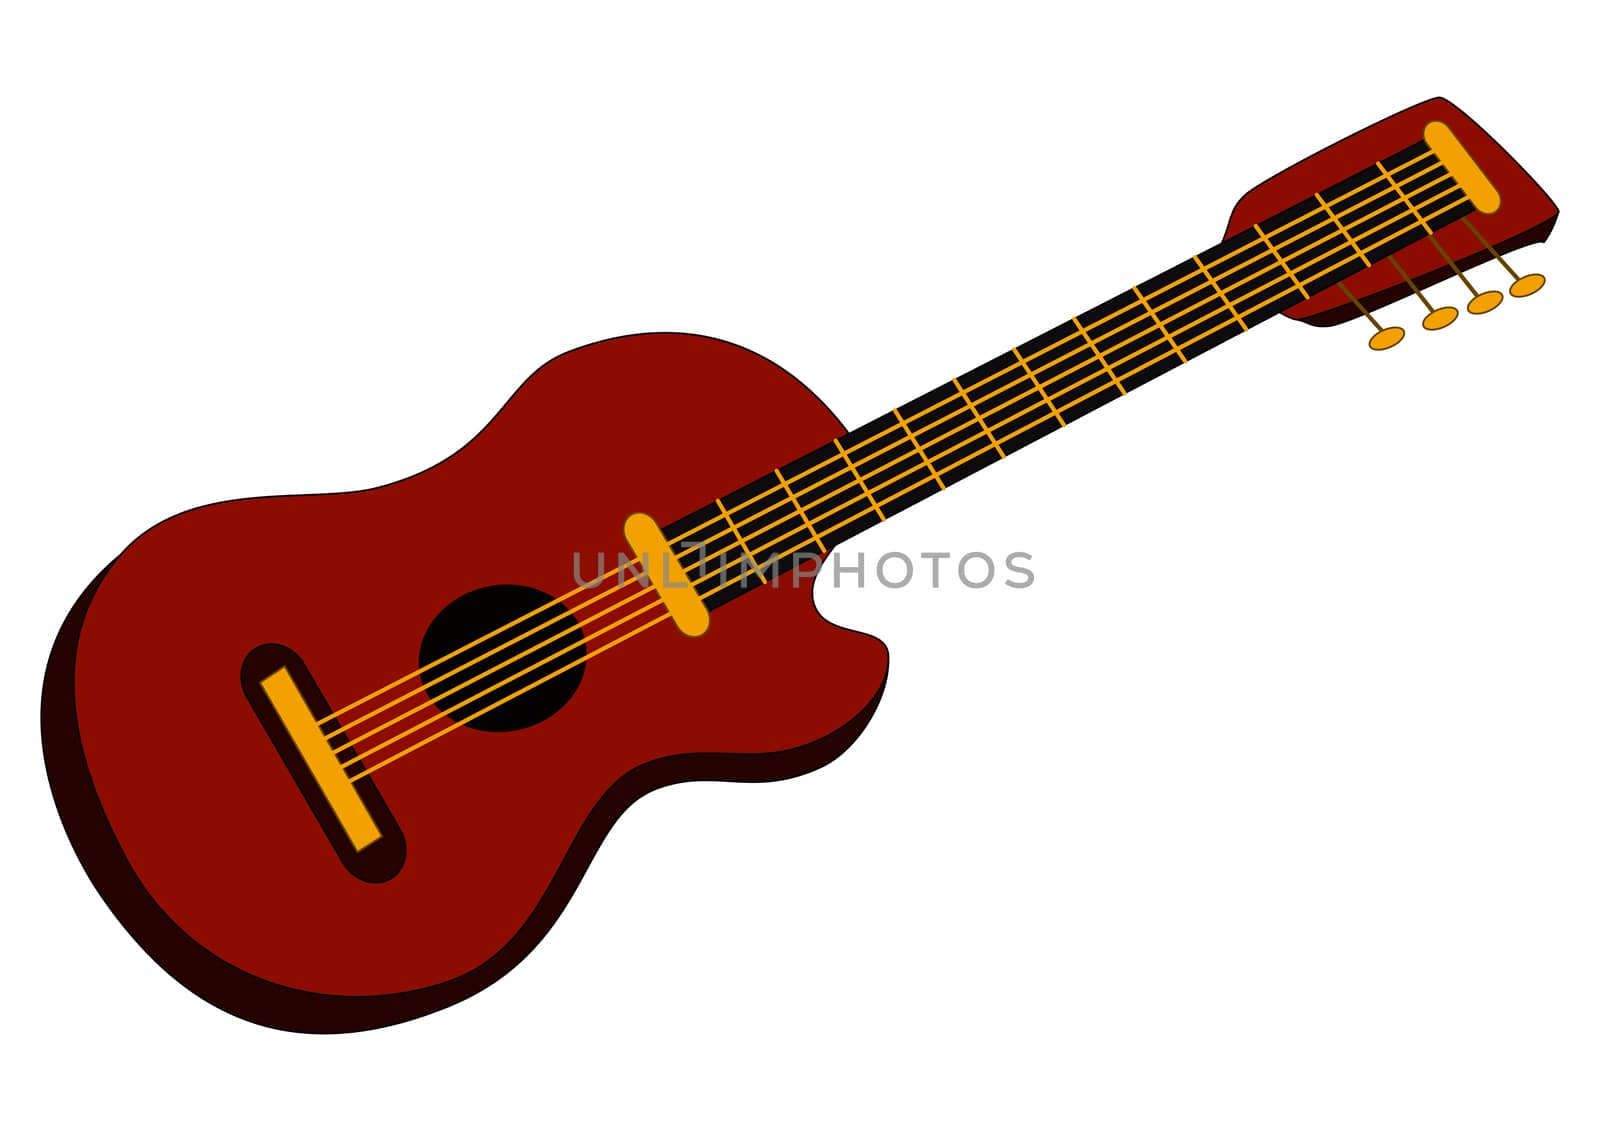 Musical instrument: brown acoustic guitar with yellow strings.